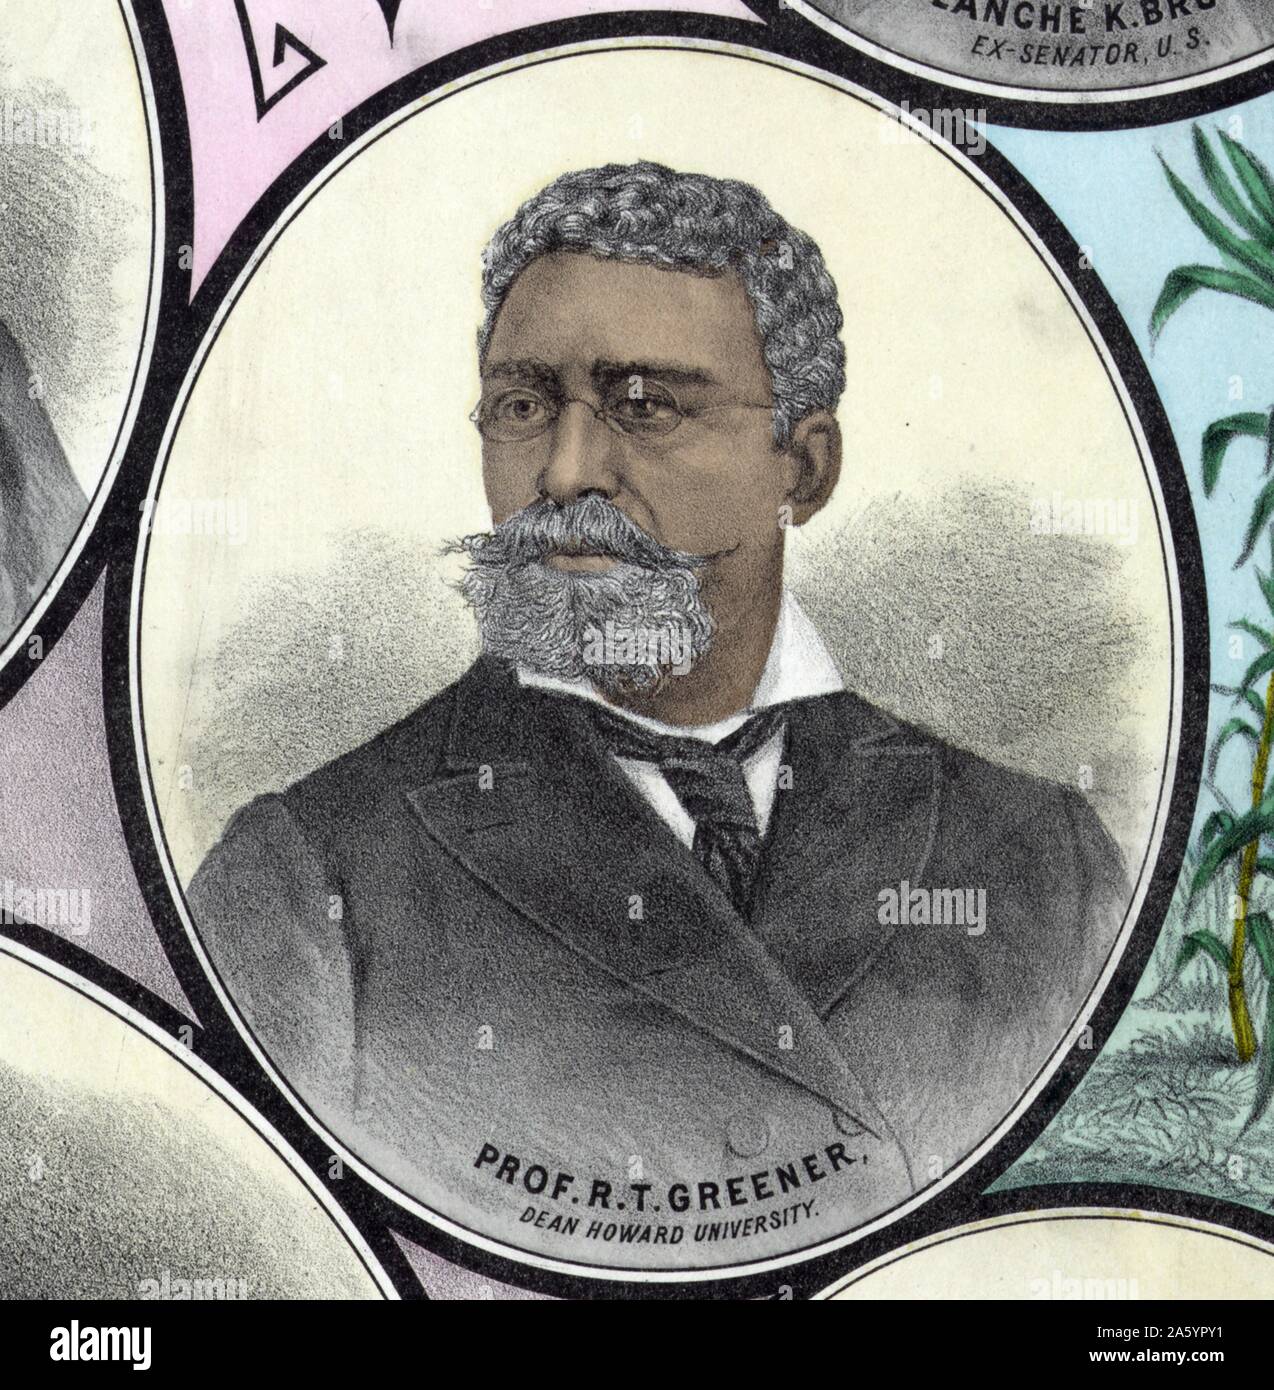 Richard Theodore Greener (January 30, 1844 – May 2, 1922) was the first African-American graduate of Harvard College and dean of the Howard University School of Law. Stock Photo